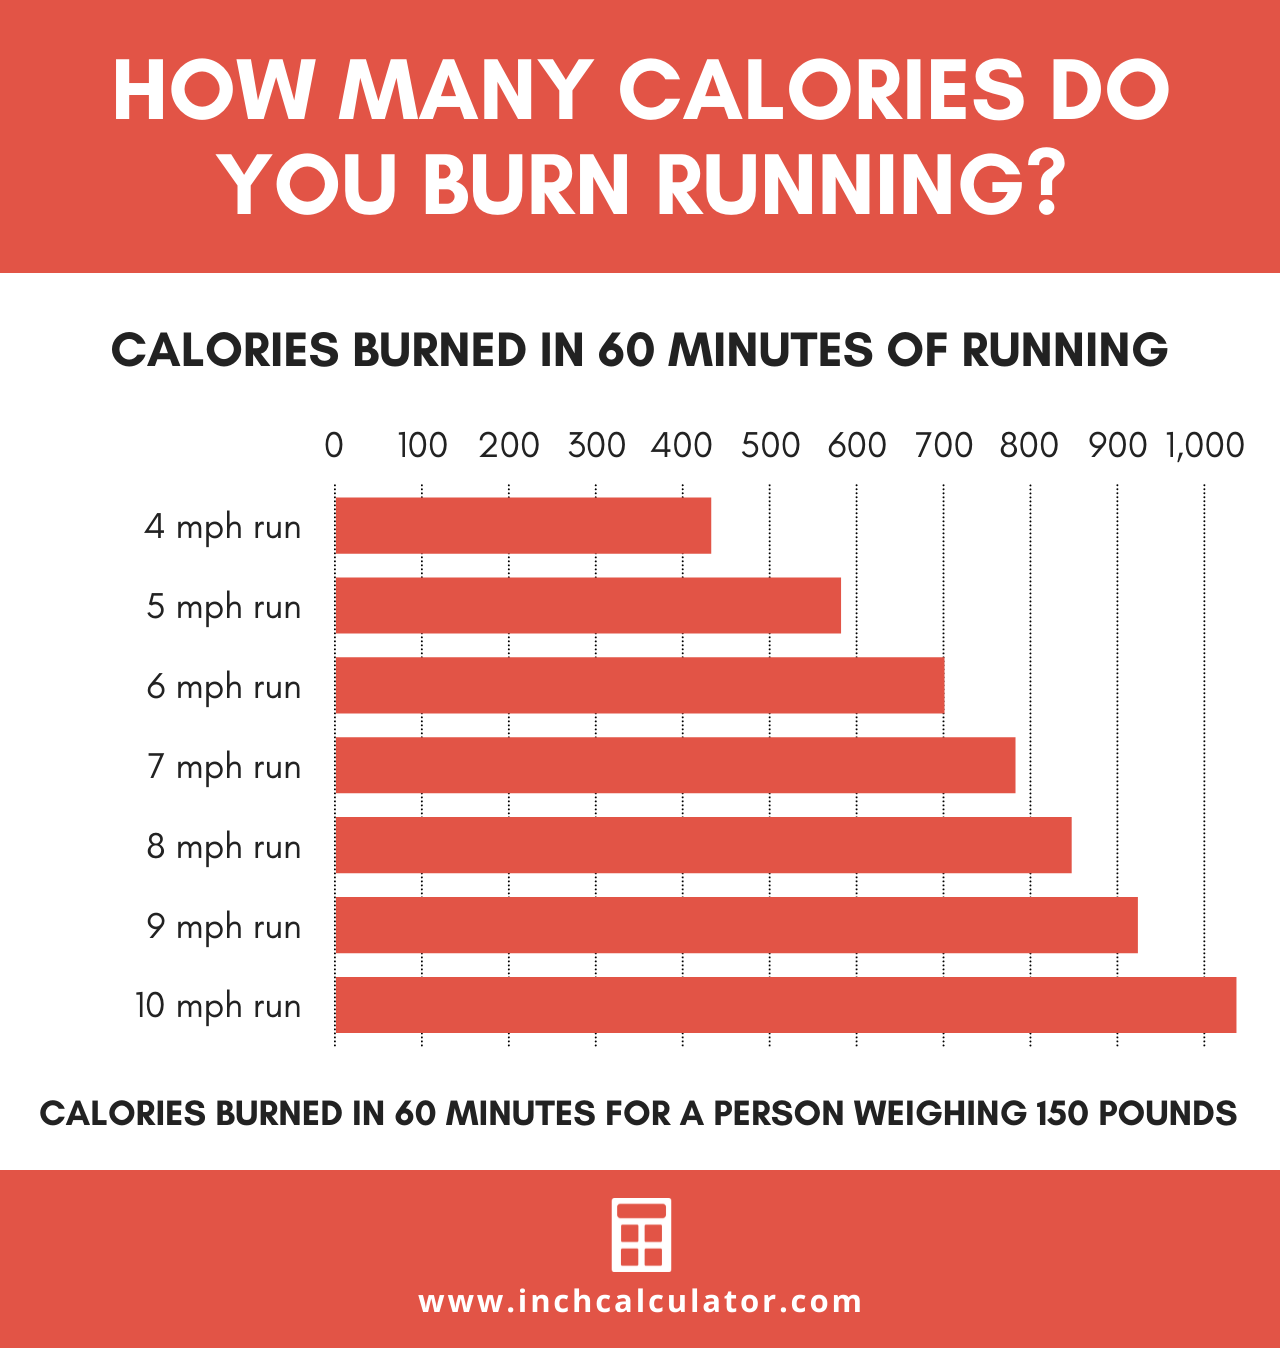 chart showing the calories burned per hour running at various levels of intensity